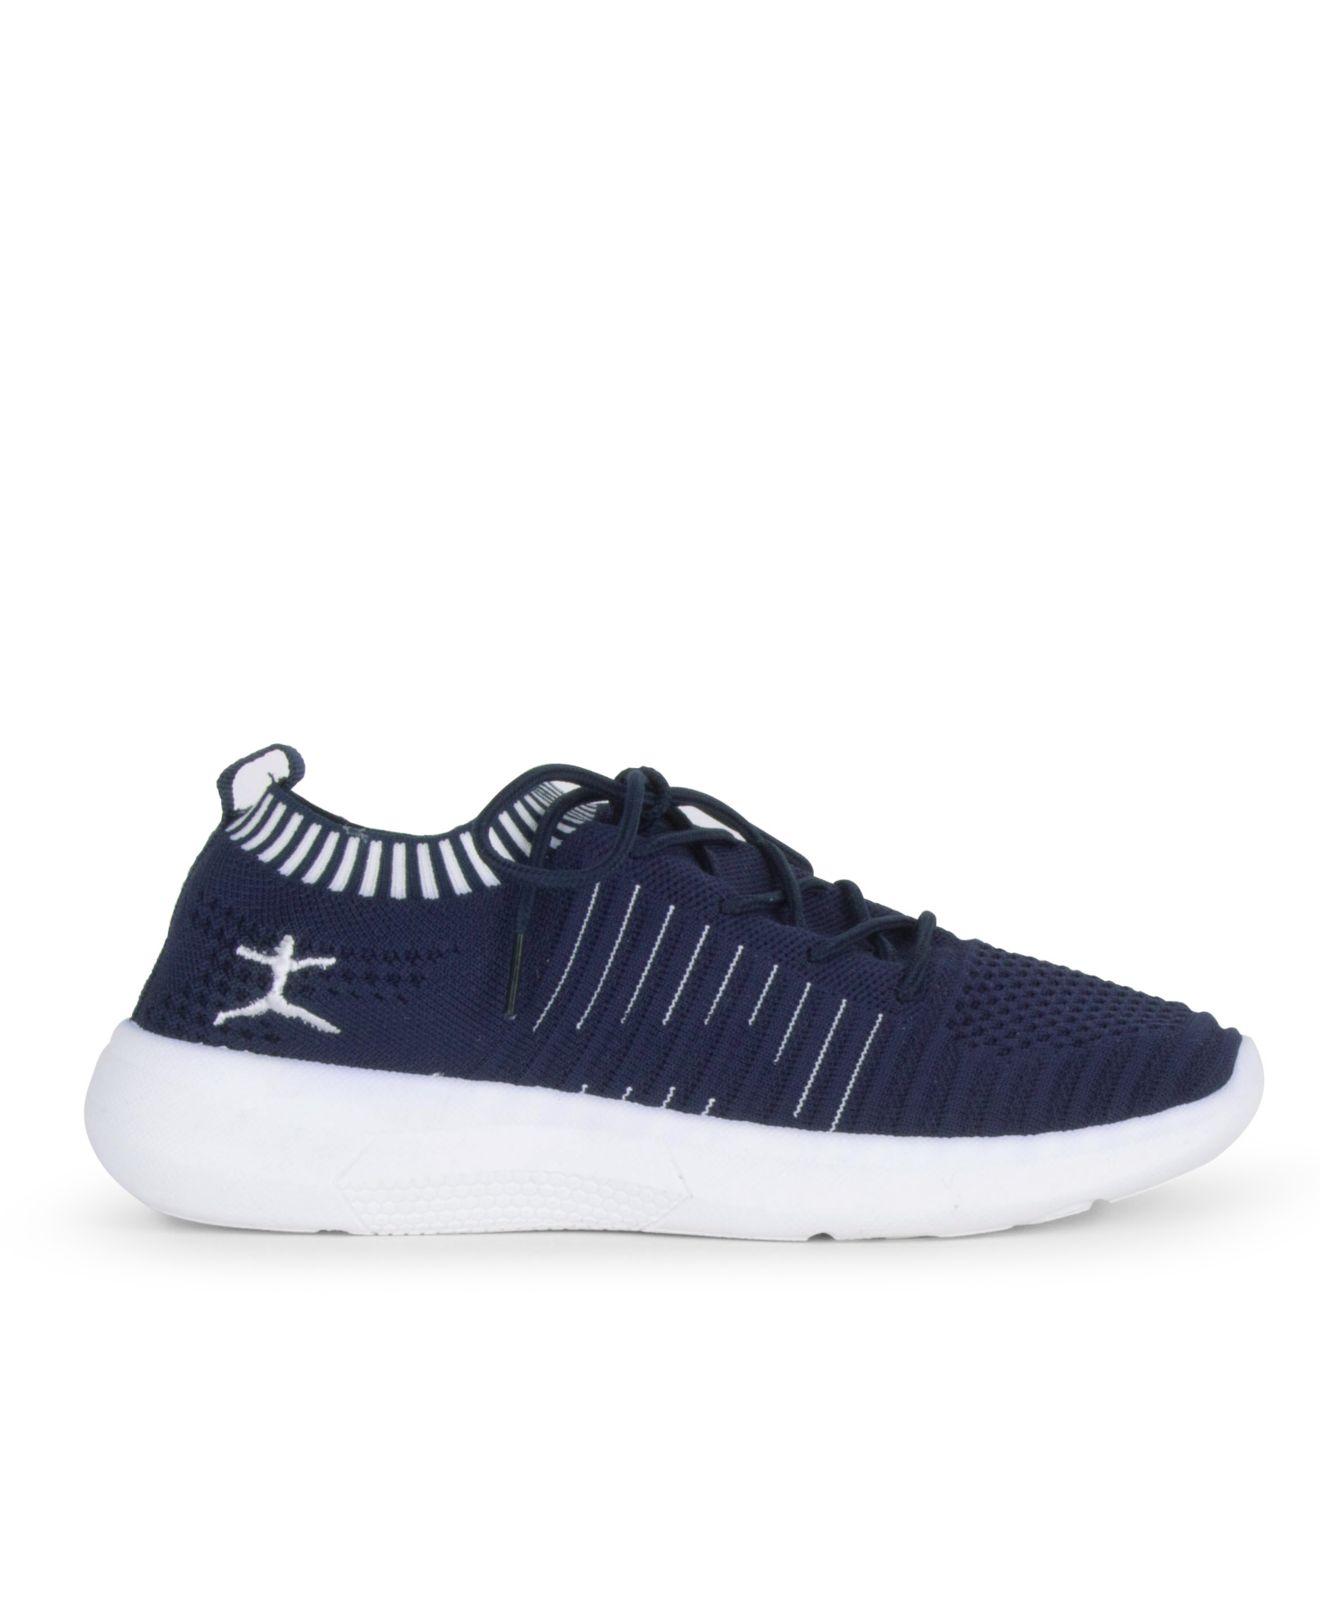 Danskin Synthetic Energy Lace Up Sneaker With Contrast Trim in Navy ...